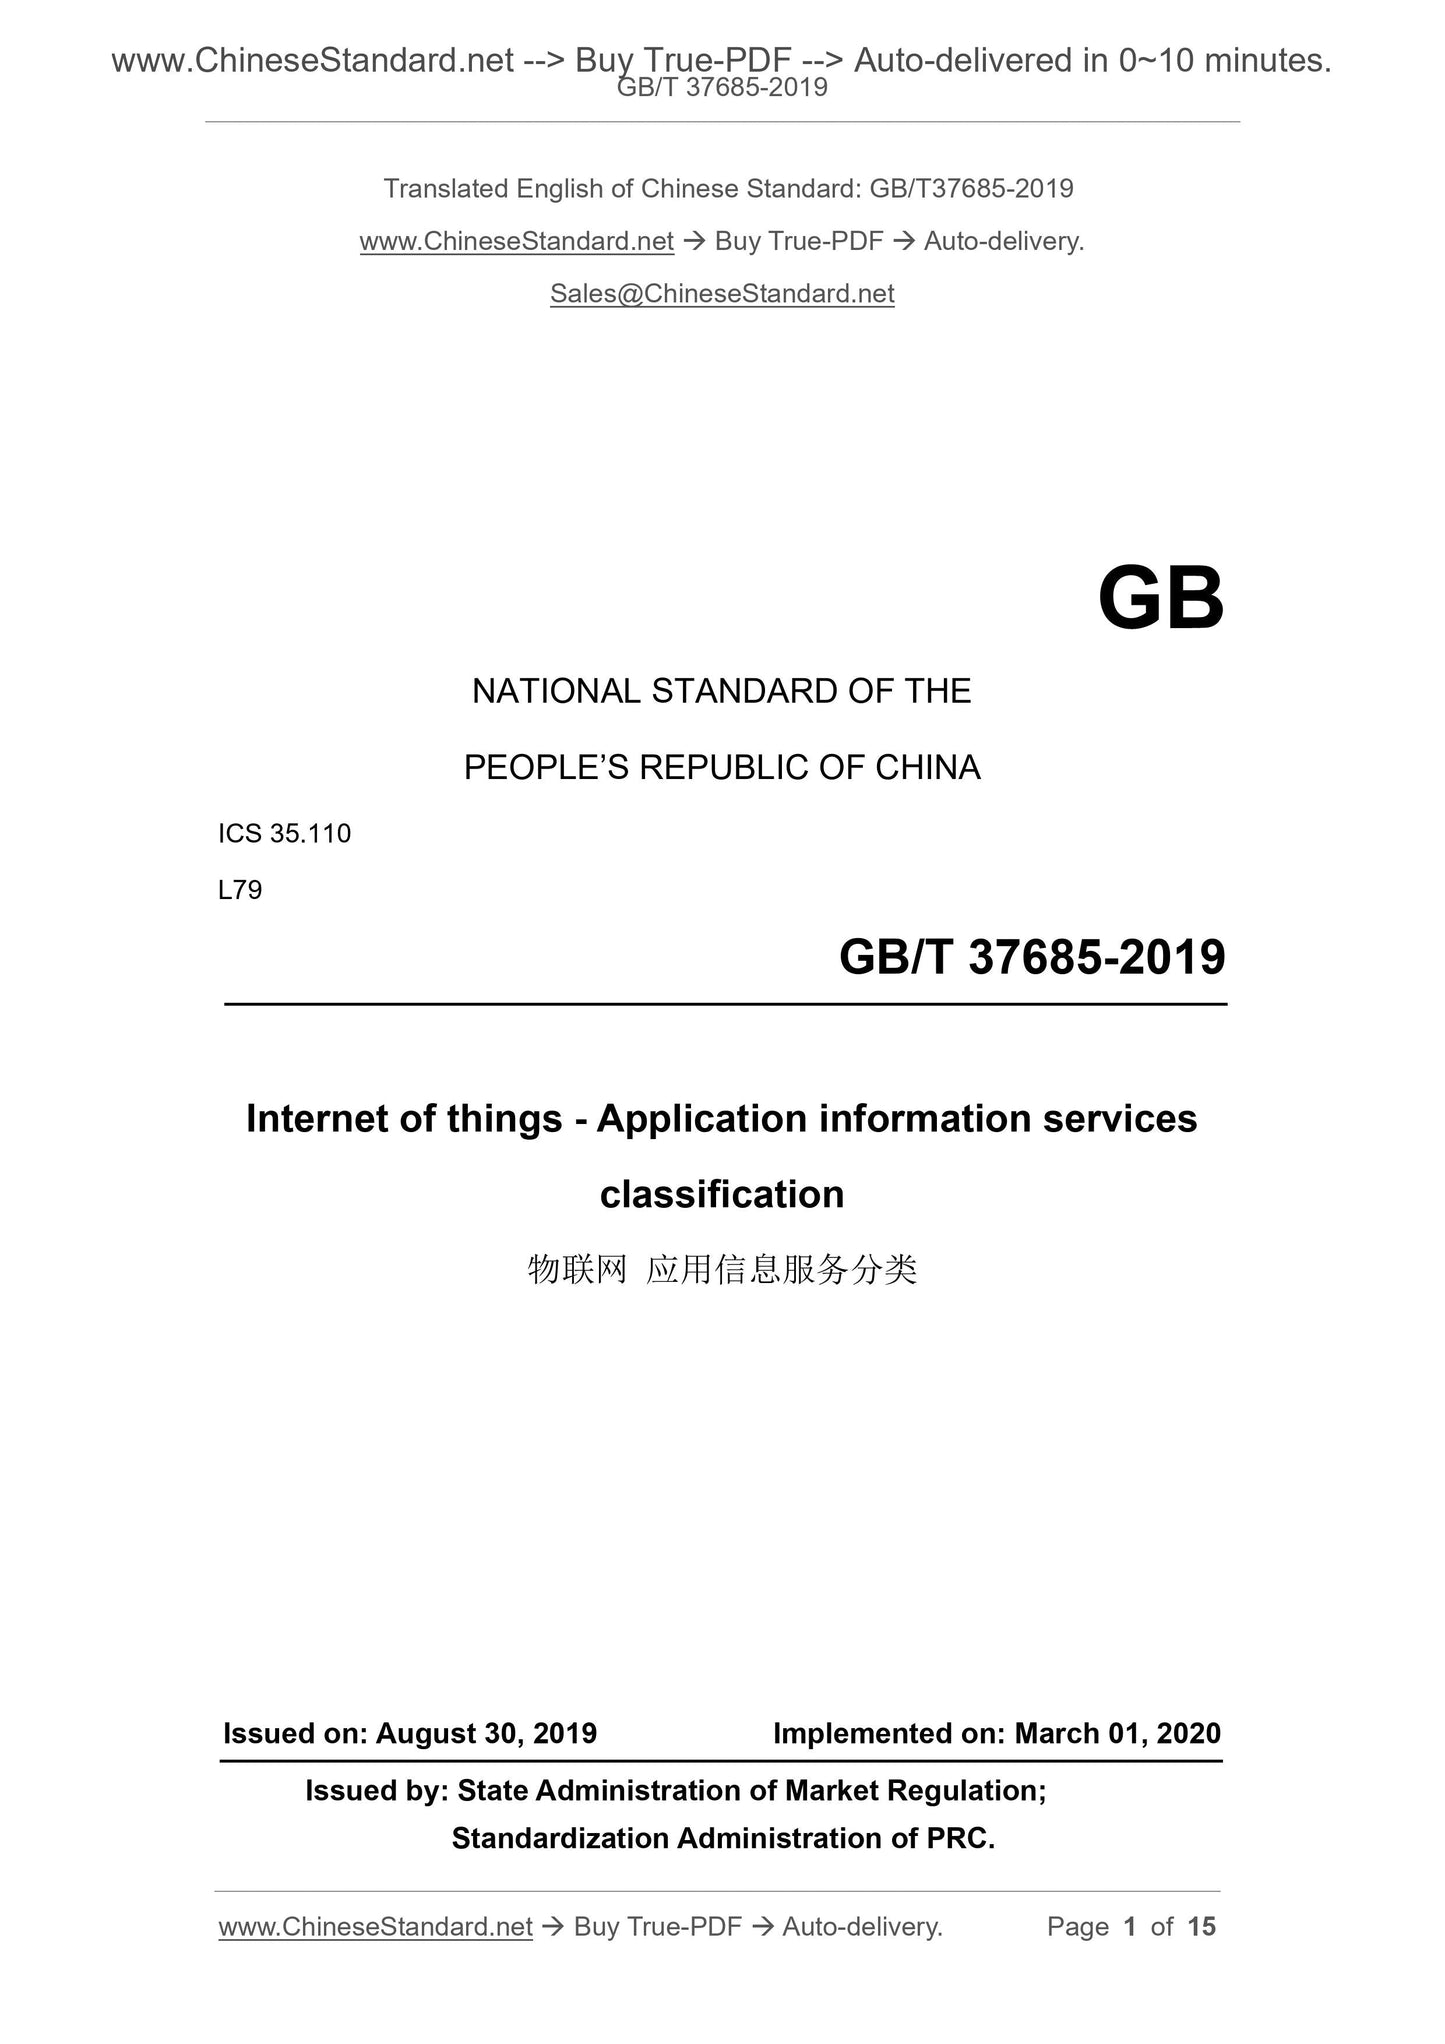 GB/T 37685-2019 Page 1